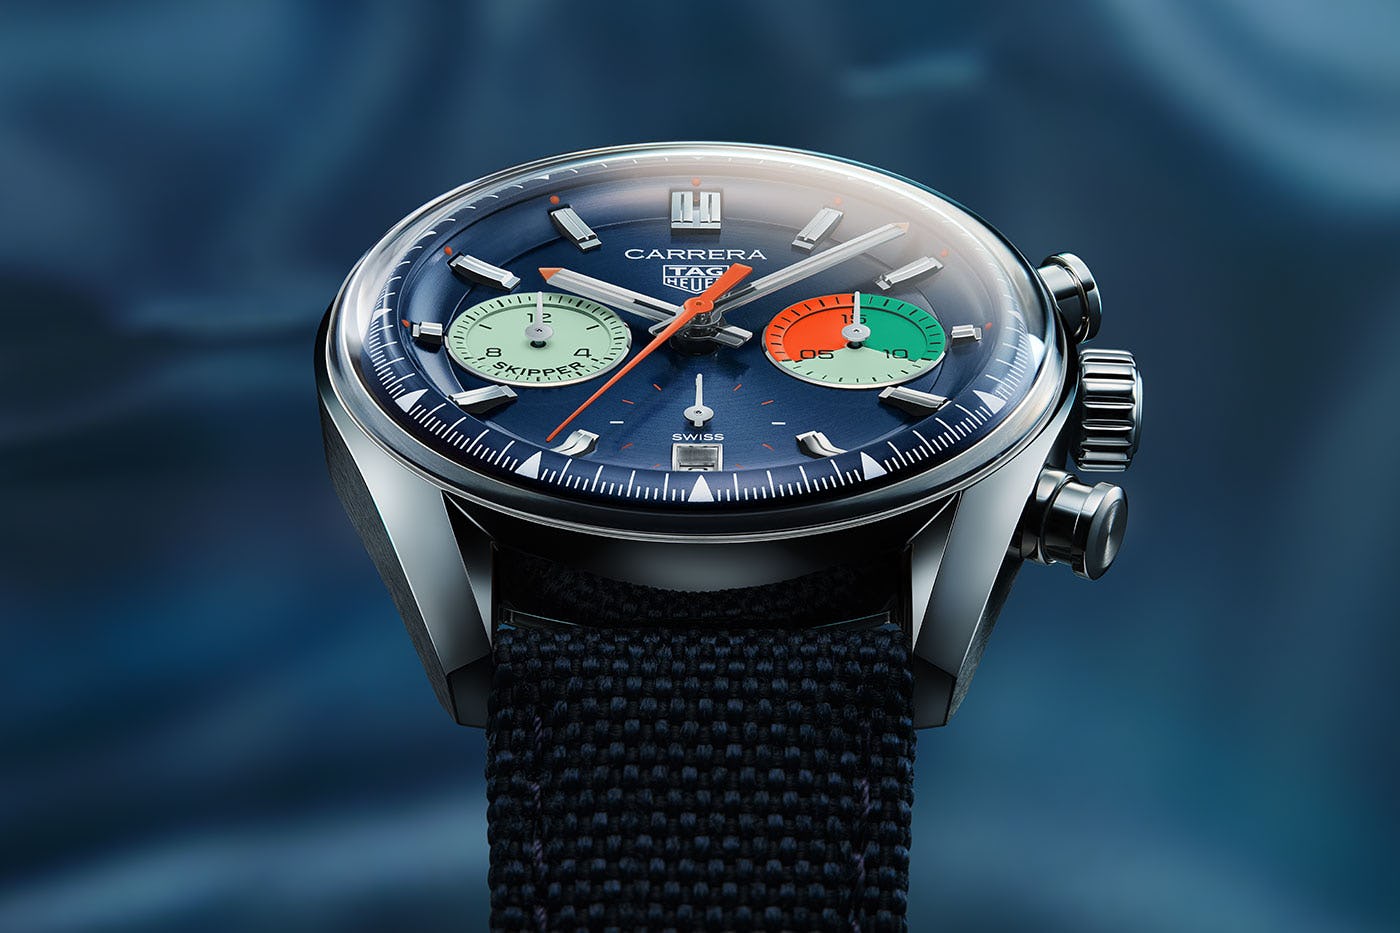 TAG Heuer - More than a successful Swiss horology hero, TAG Heuer